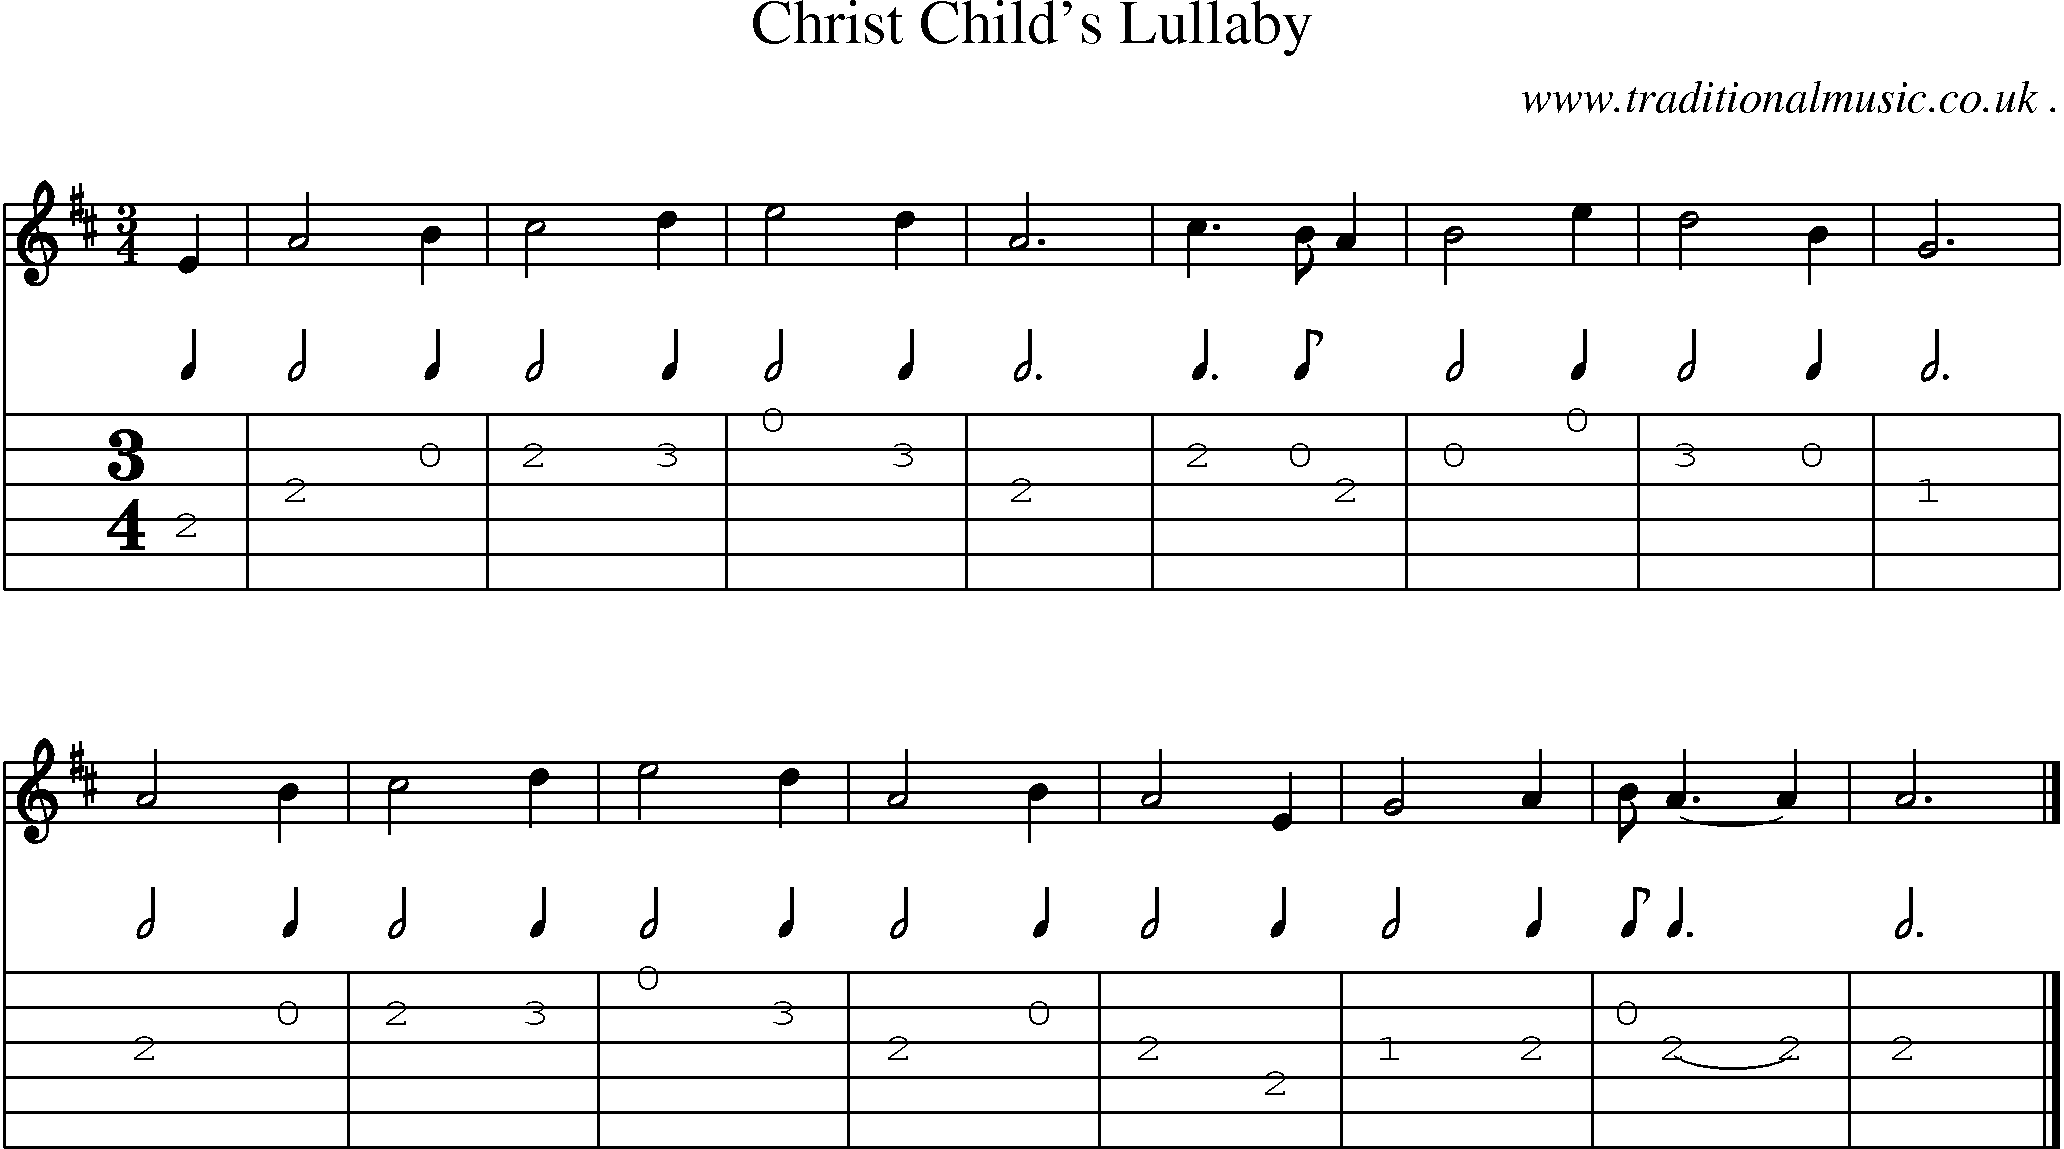 Sheet-music  score, Chords and Guitar Tabs for Christ Childs Lullaby